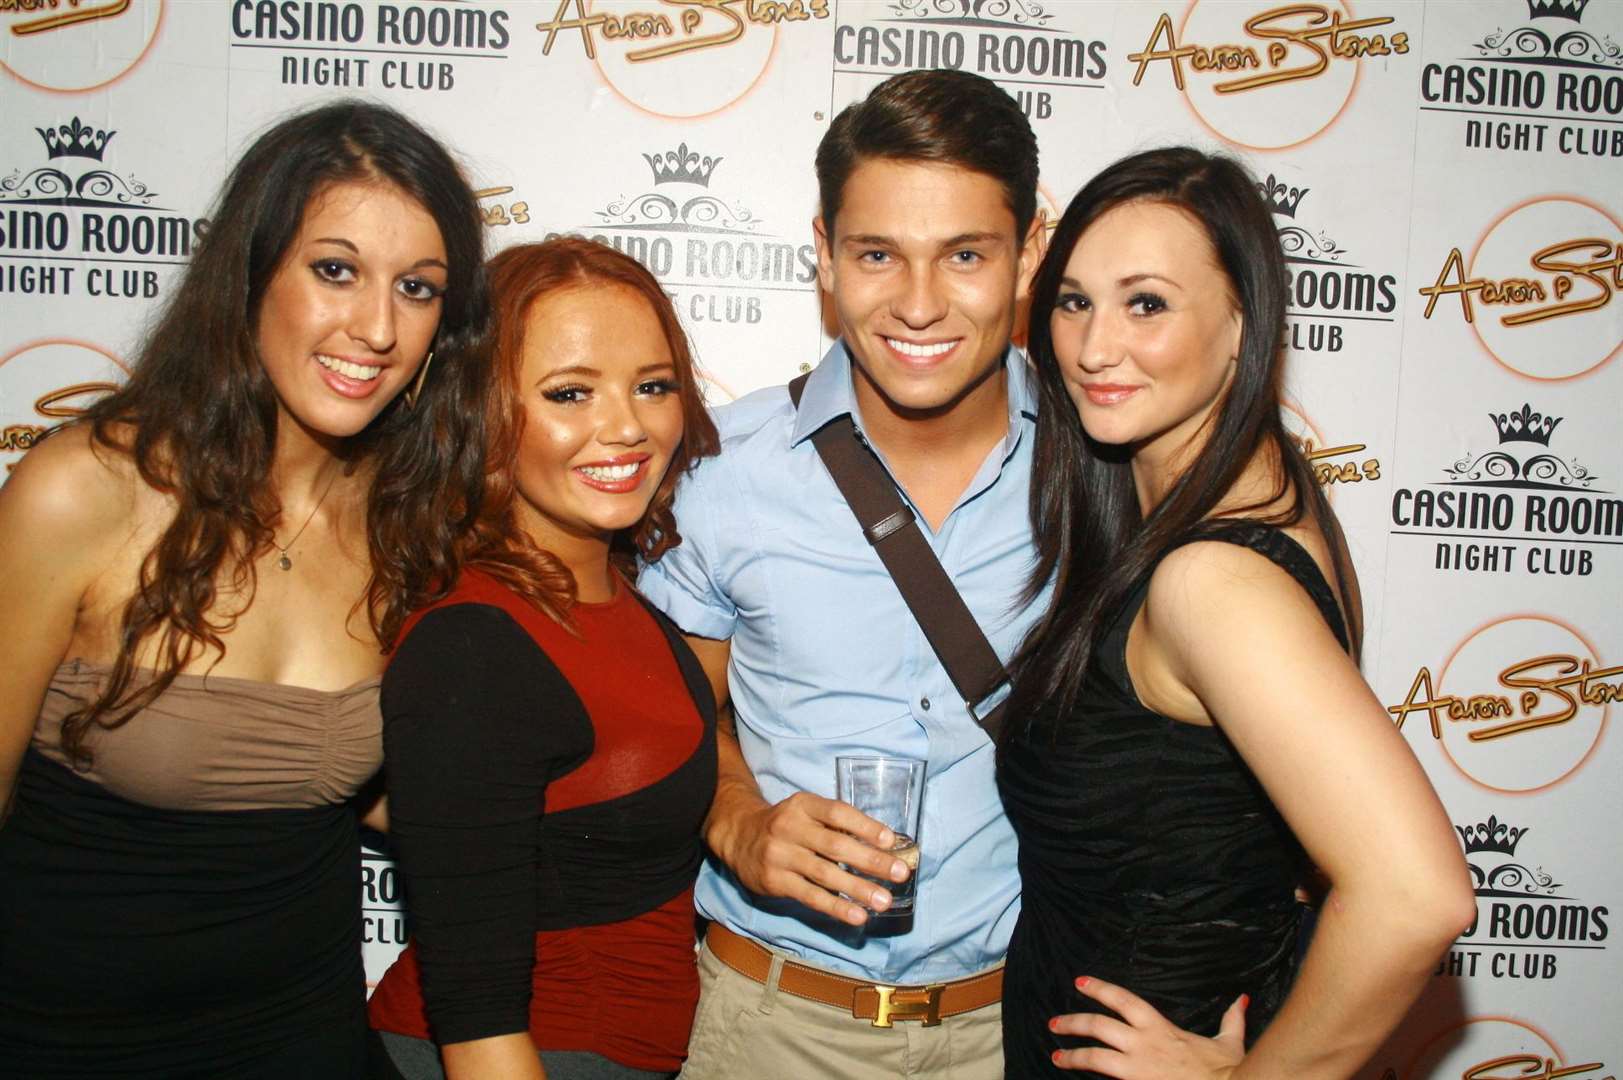 Joey Essex from ITV show The Only Way is Essex at the Casino Rooms nightclub, Rochester.